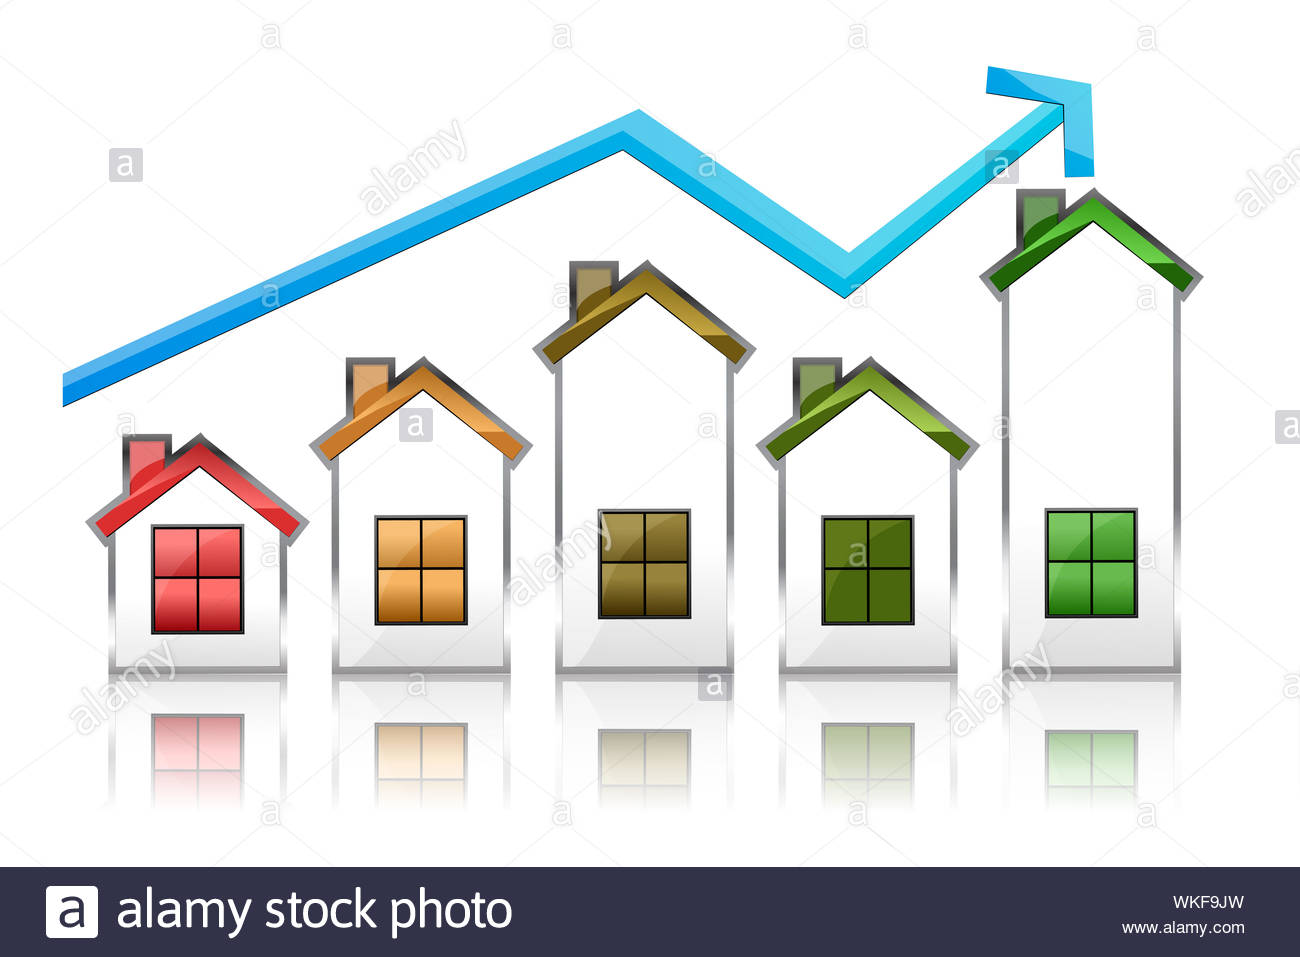 Illustration Of Homes With Grow Arrow On White Background Stock